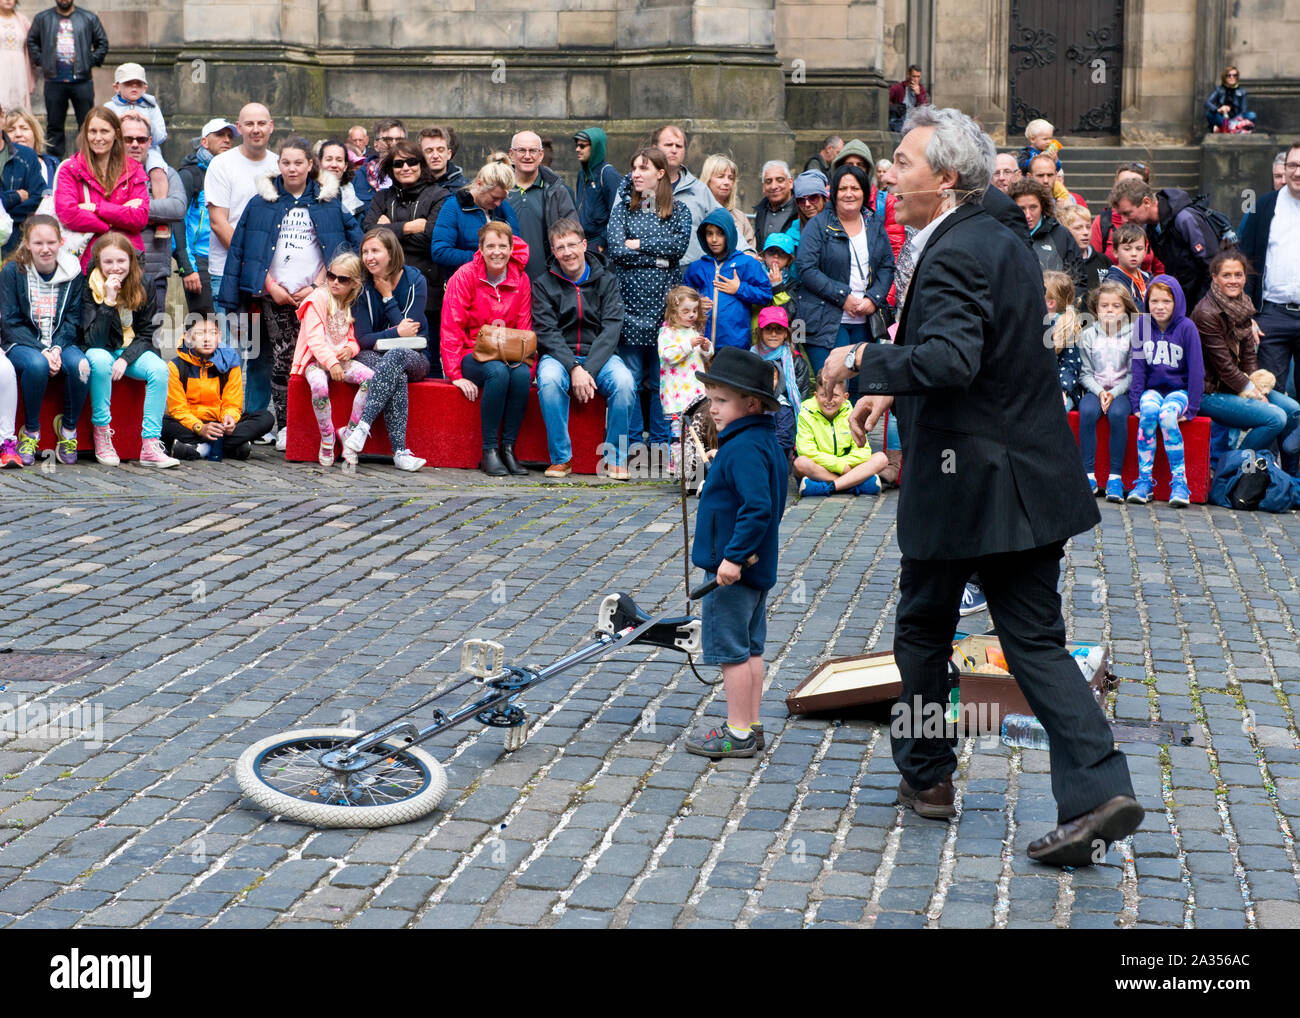 Young boy from audience enjoying taking part in street act. Edinburgh Fringe Festival Stock Photo